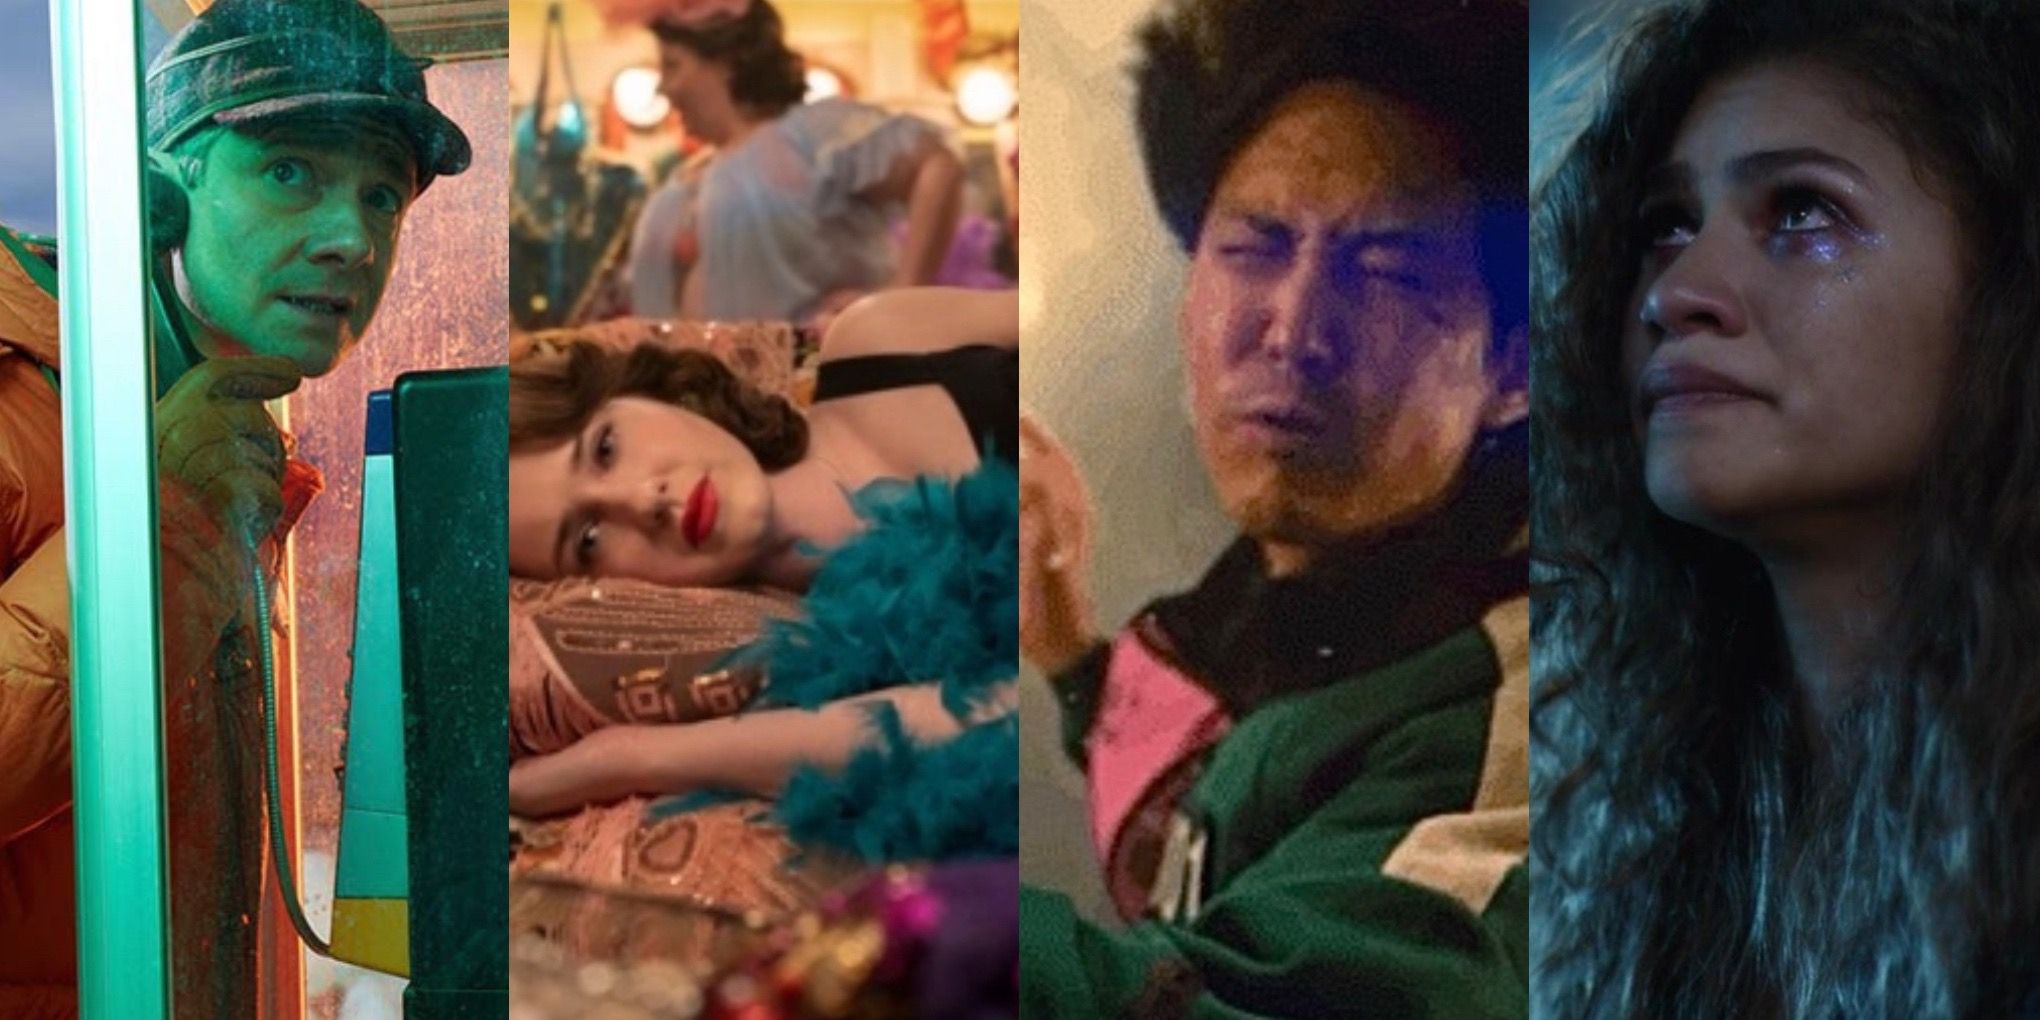 Scenes from Fargo, The Marvelous Mrs. Maisel, Squid Game and Euphoria